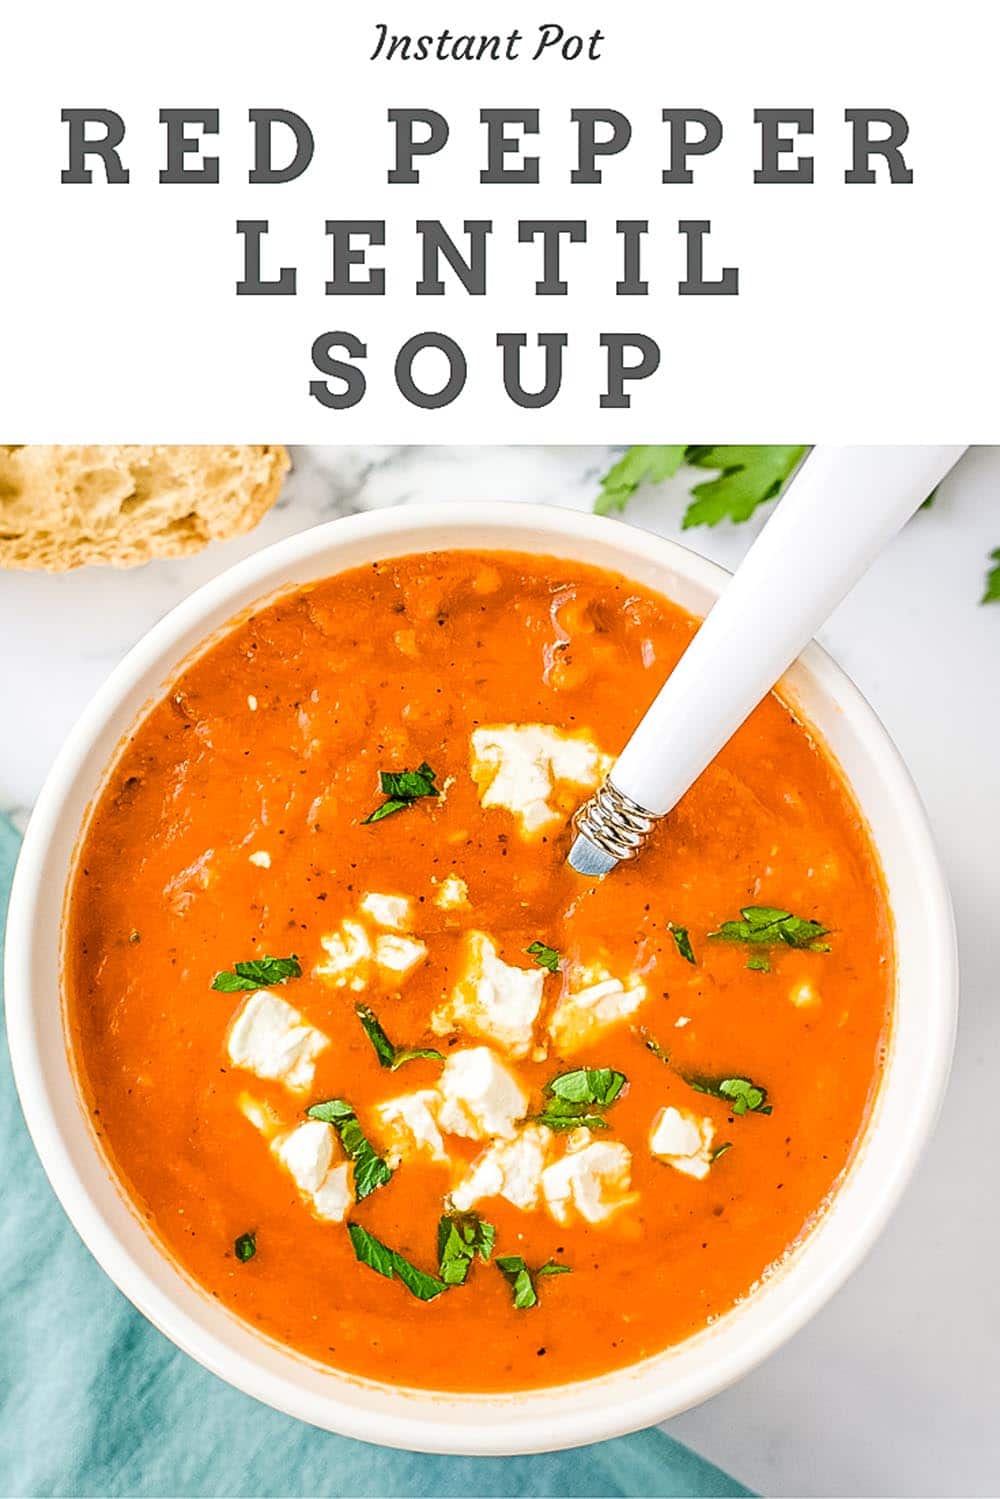 Instant pot red pepper lentil soup text and picture of garnished soup in a bowl